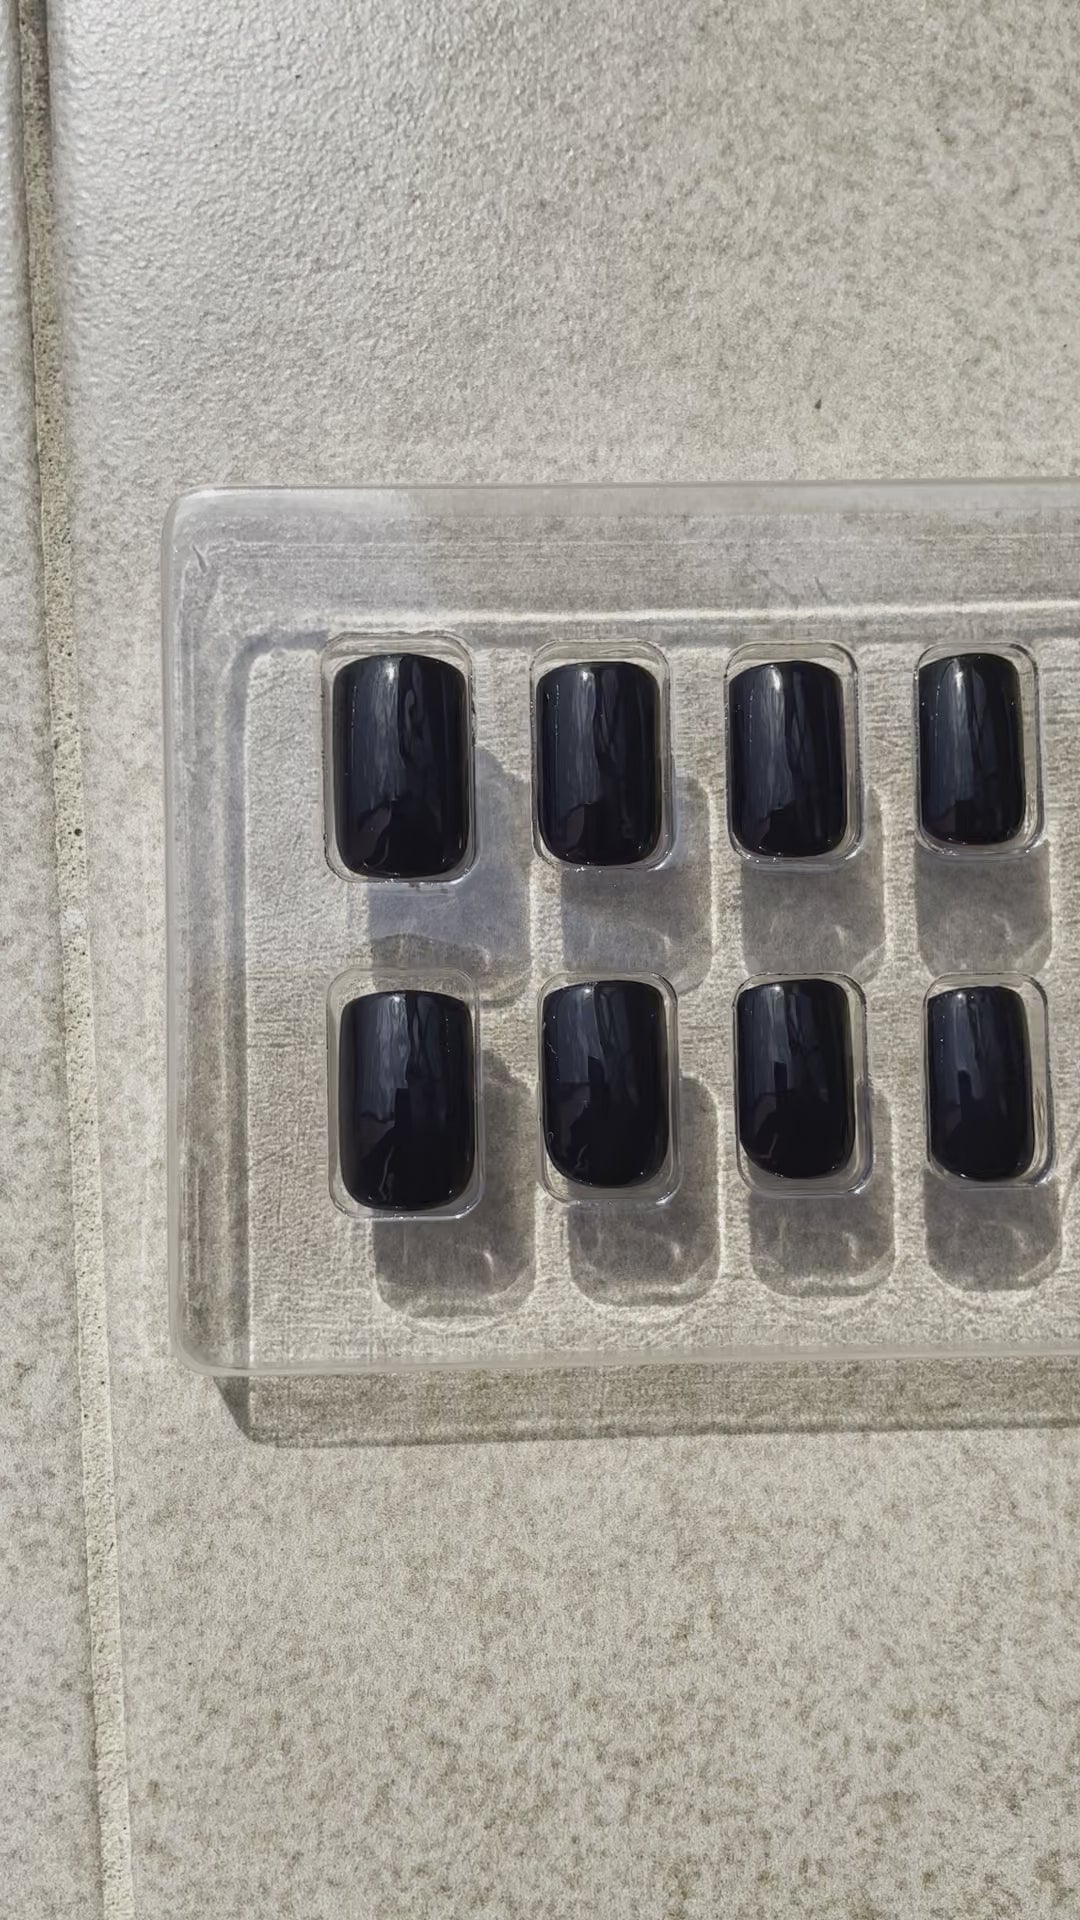 Reusable Noir Square jet black Press-on Nails made by Leewa Beauty 